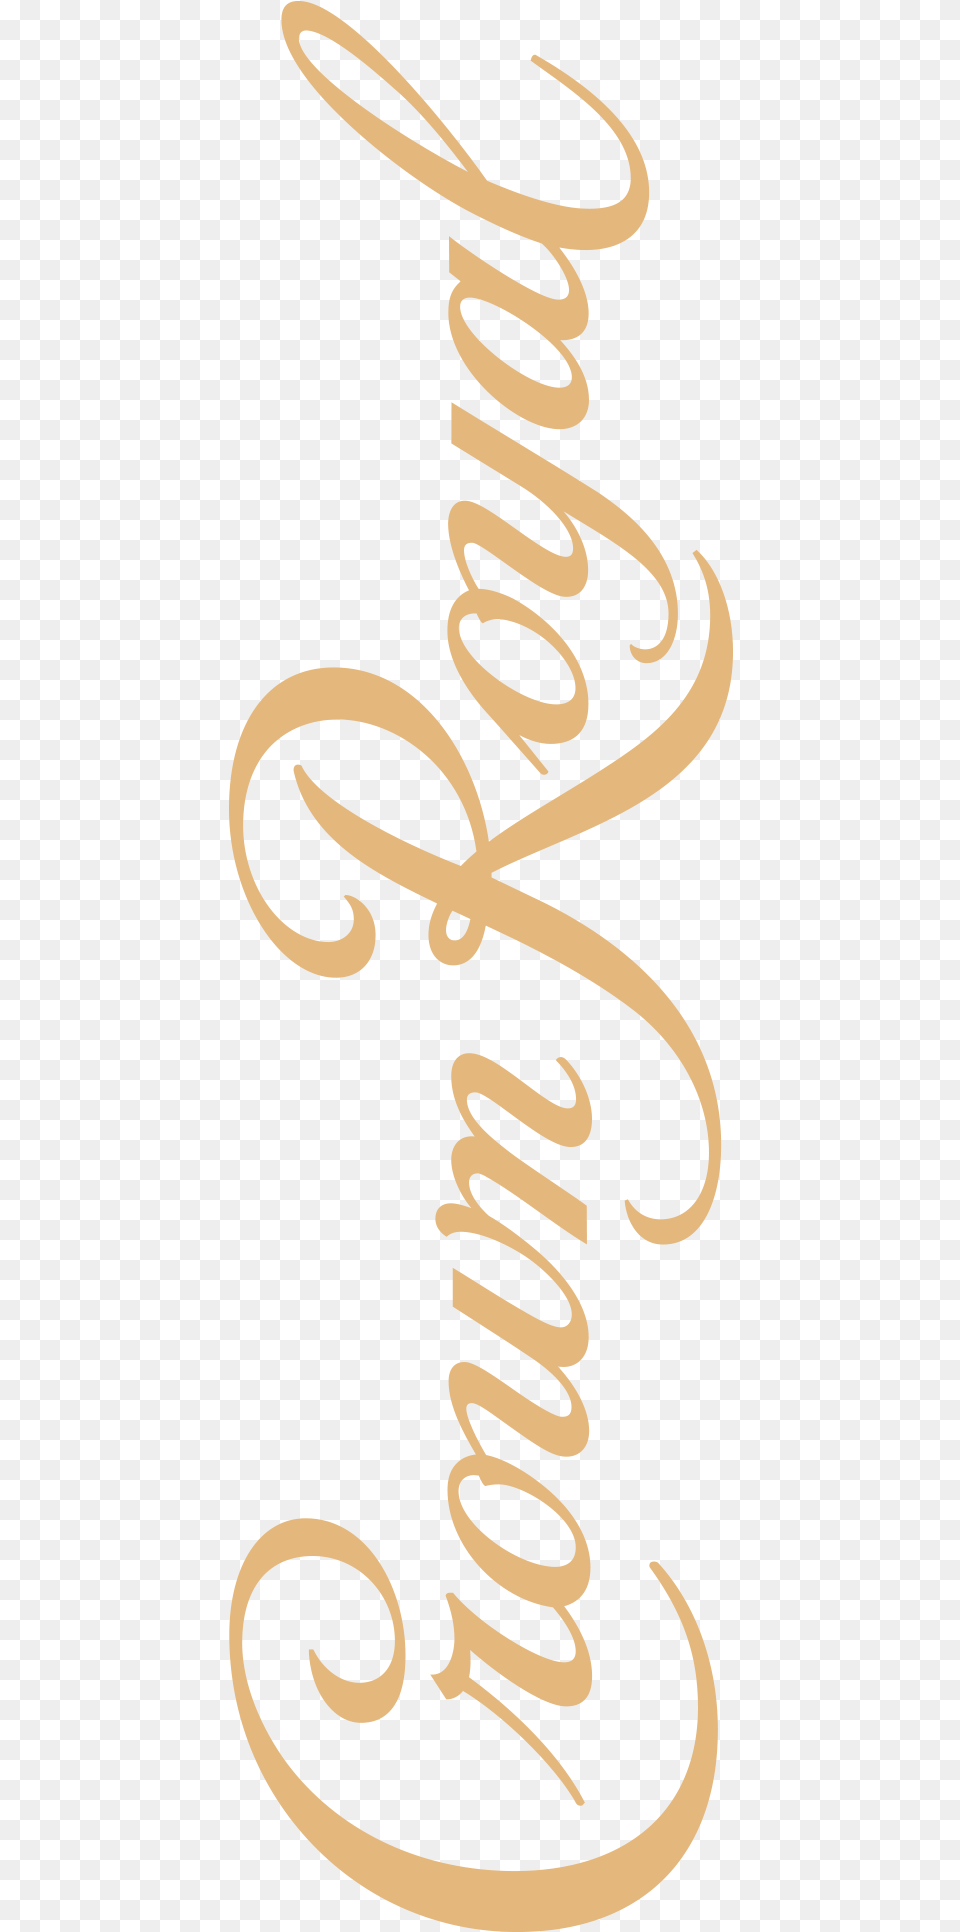 Discover The Superior Quality Of Crown Royal Canadian Crown Royal Canadian Whisky Vanilla, Coil, Spiral, Calligraphy, Handwriting Png Image